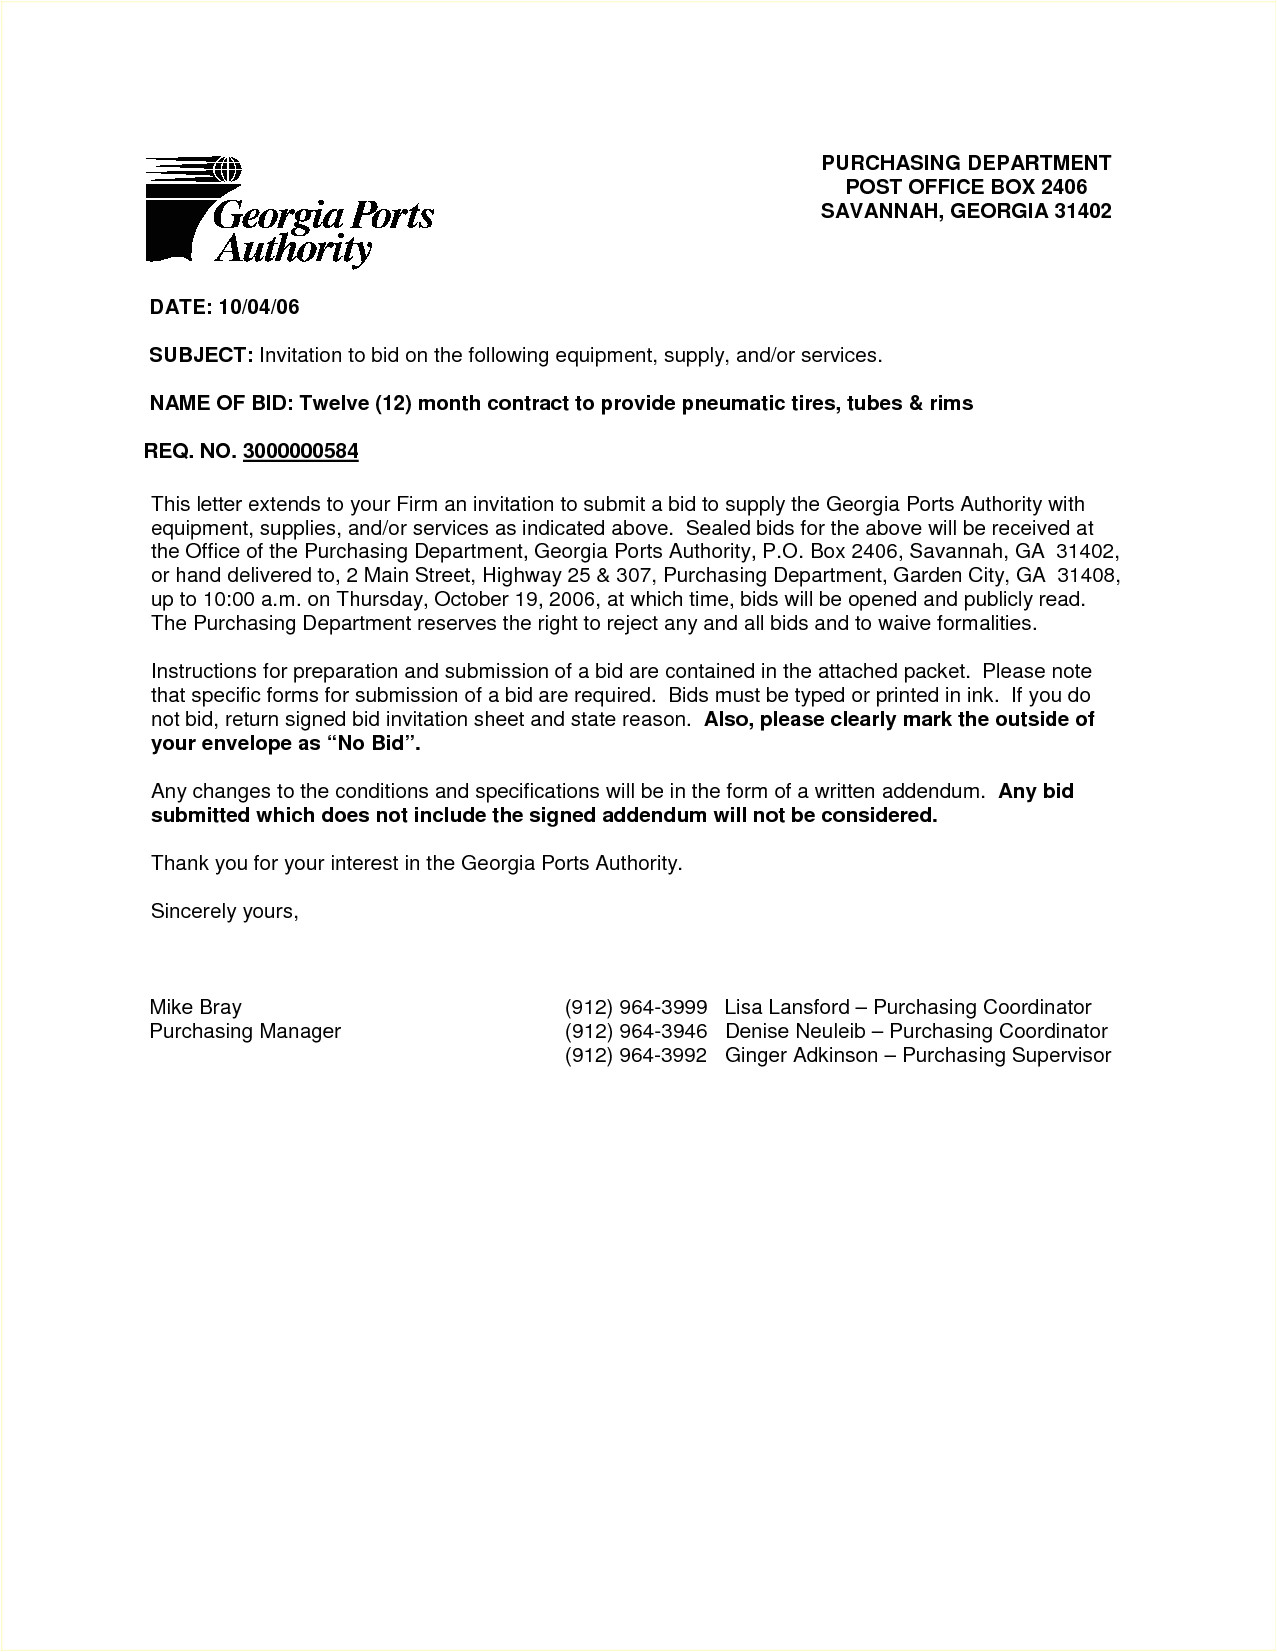 Sample Of Cover Letter for Proposal Submission Cover Letter for Proposal Submission the Letter Sample